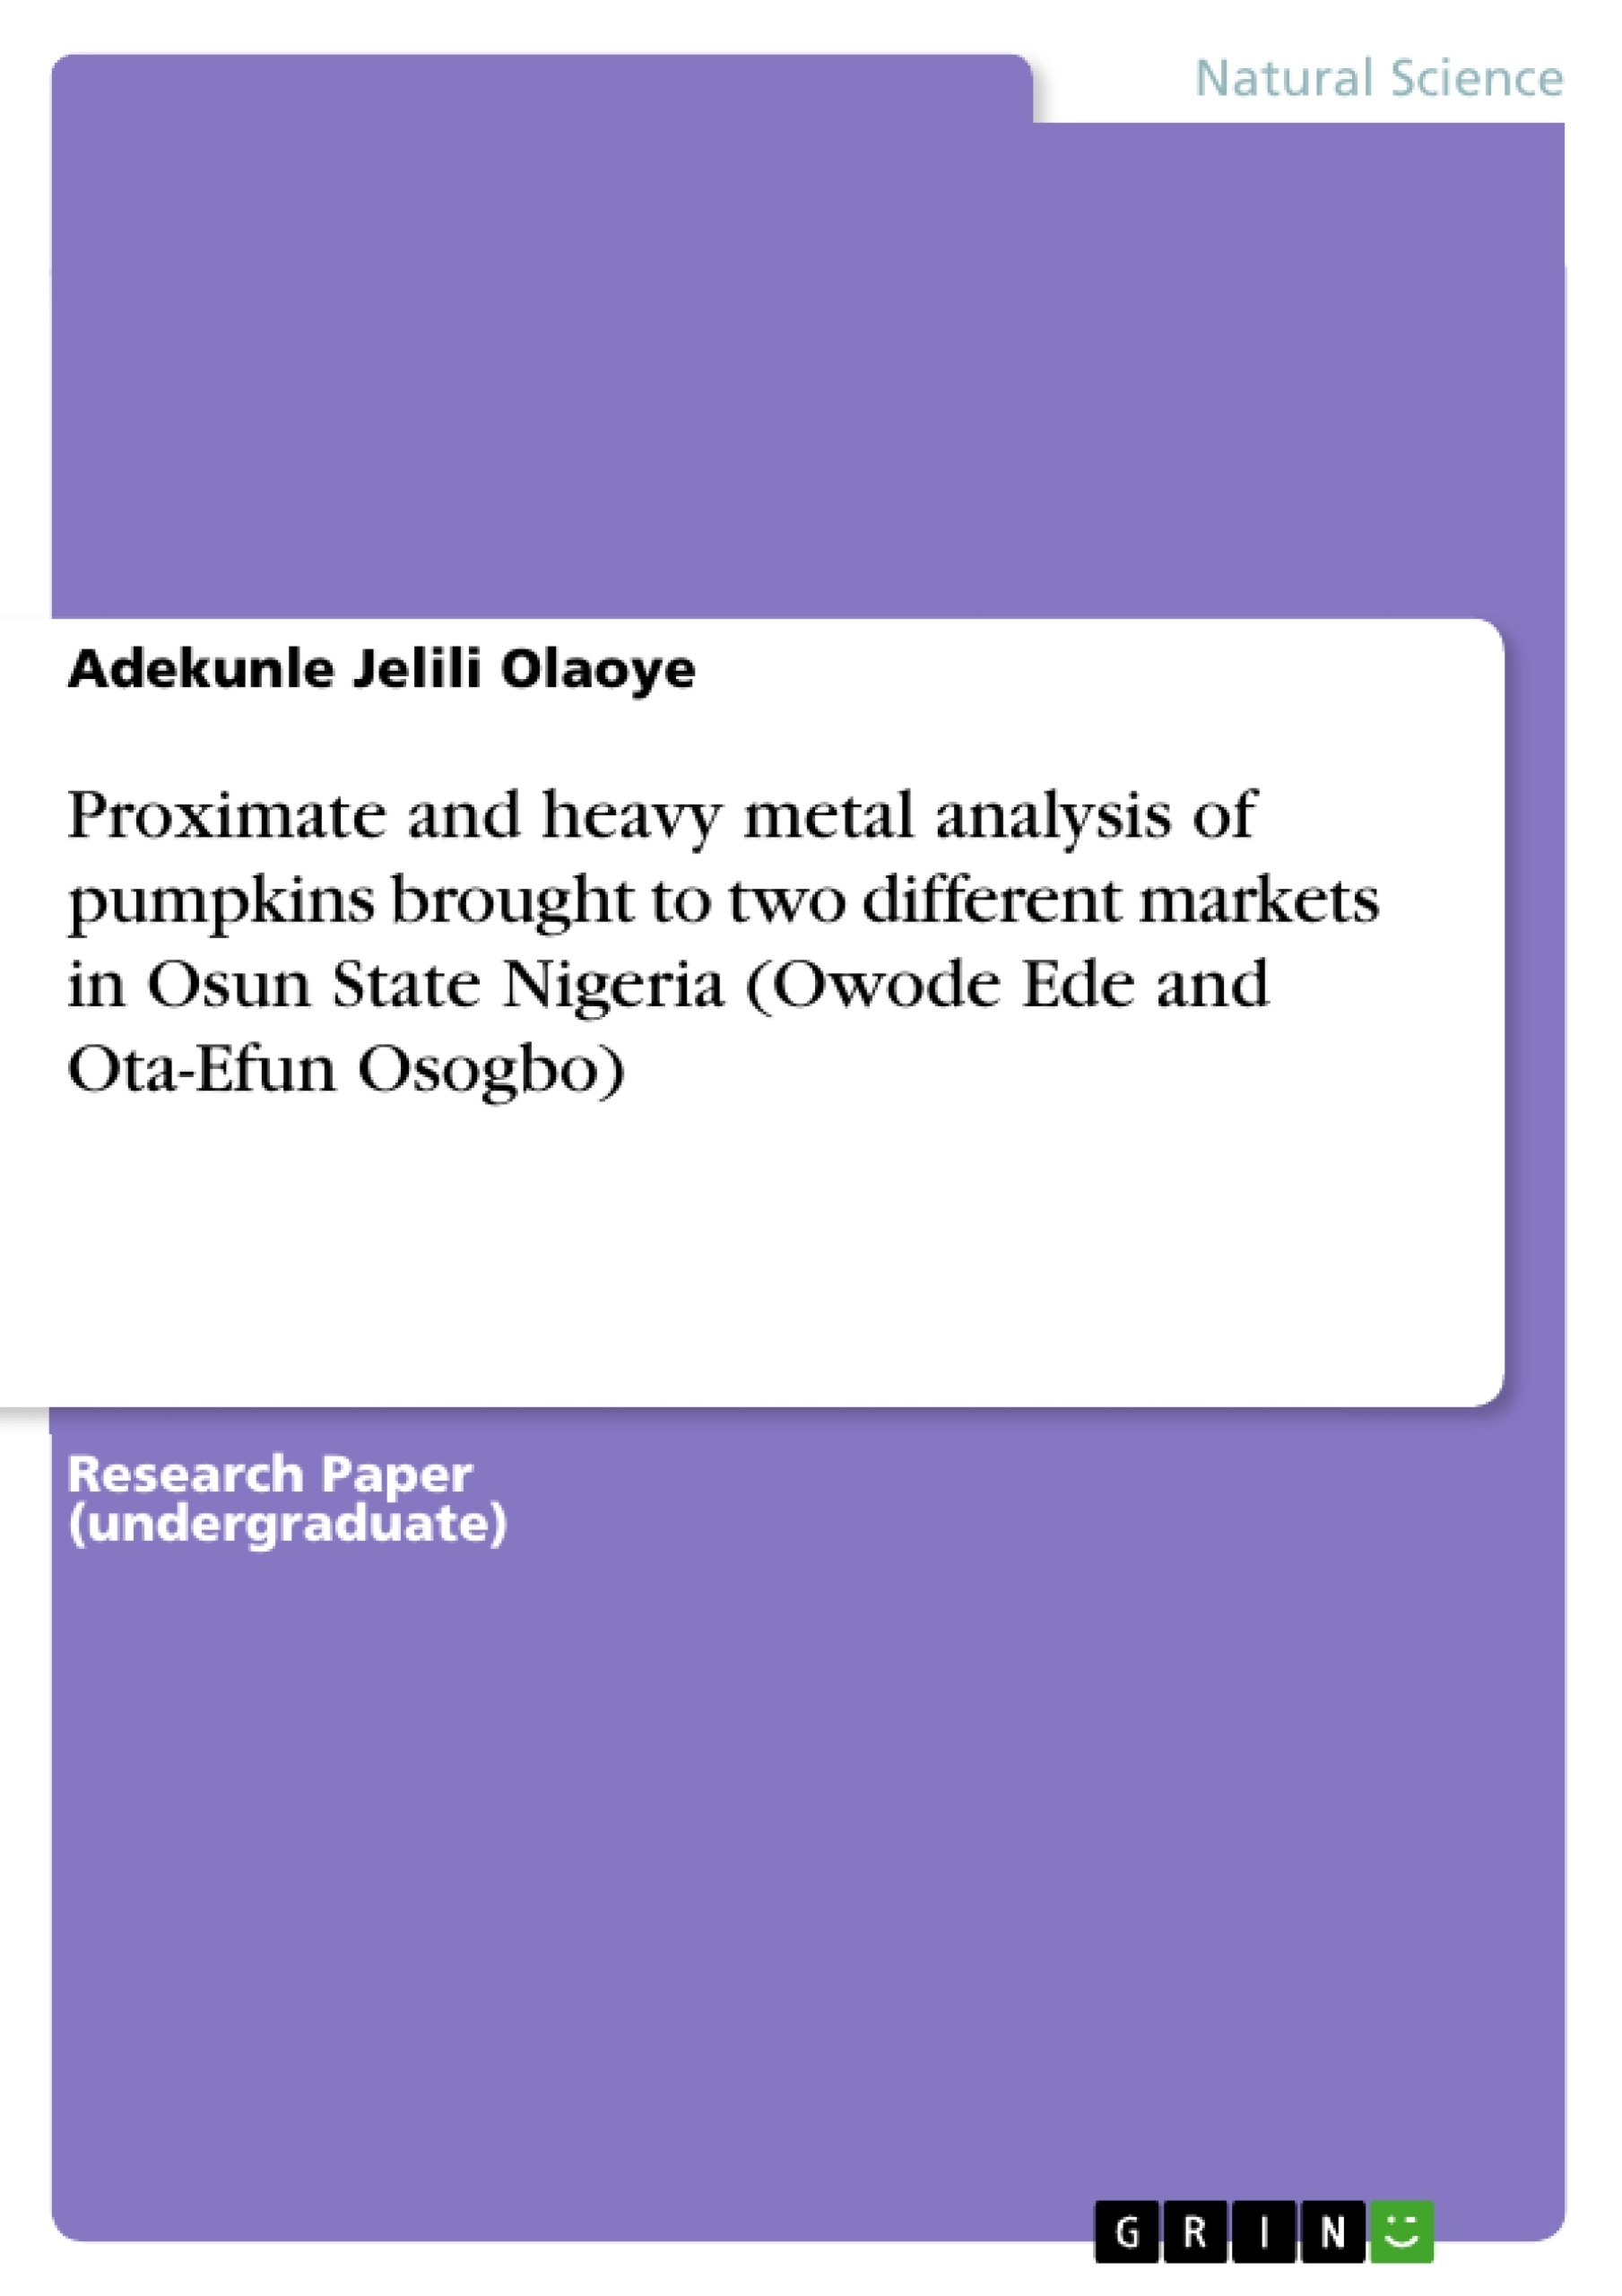 Titel: Proximate and heavy metal analysis of pumpkins brought to two different markets in Osun State Nigeria (Owode Ede and Ota-Efun Osogbo)